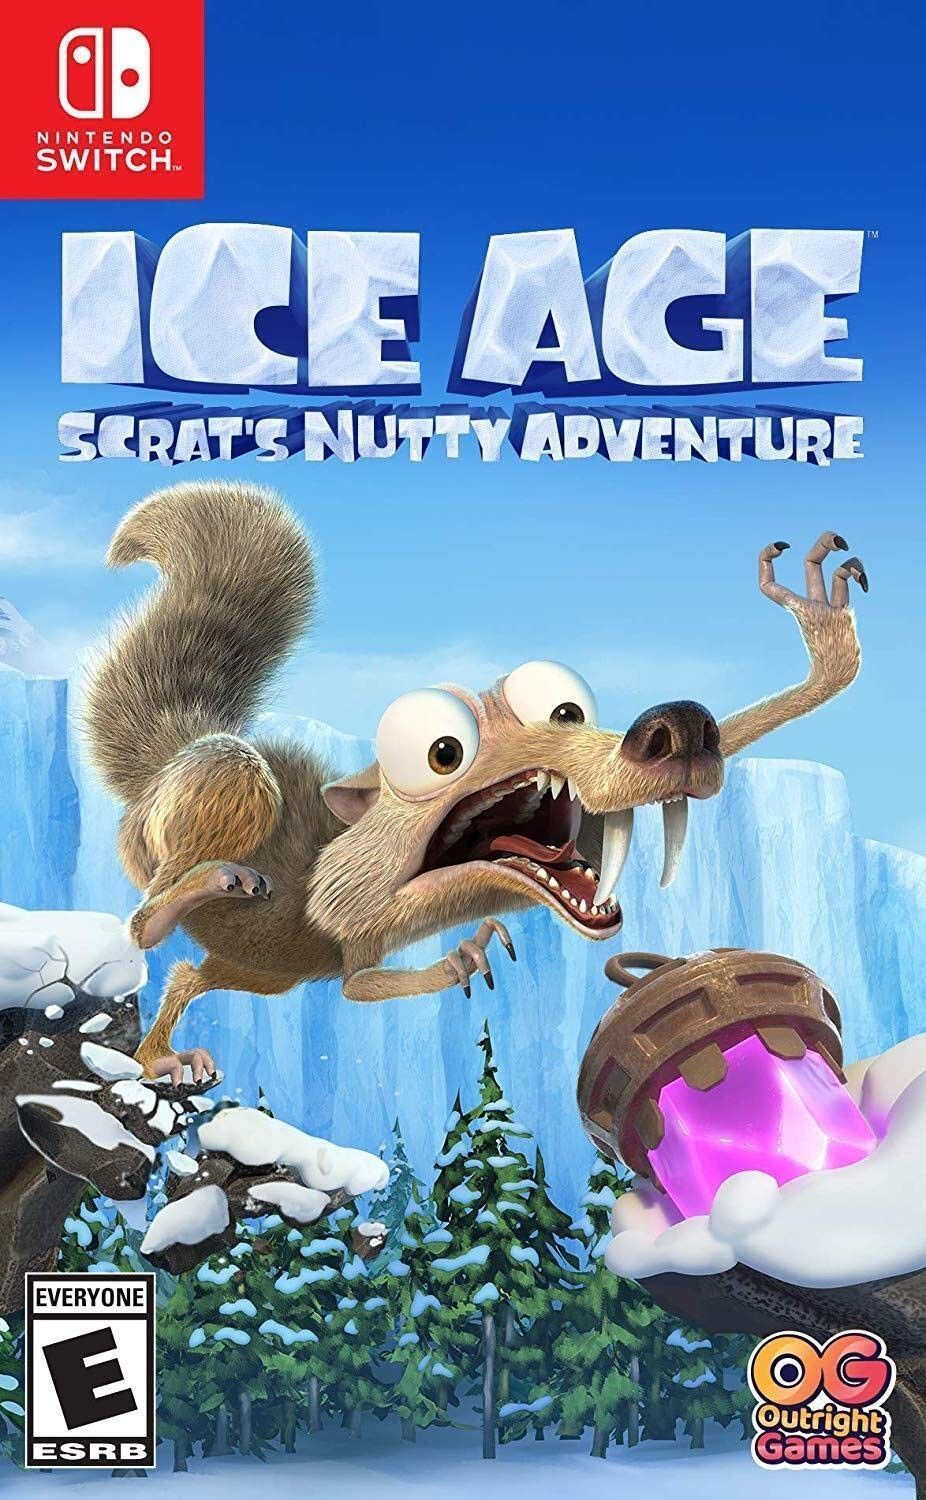 Whats the opposite of ice age?